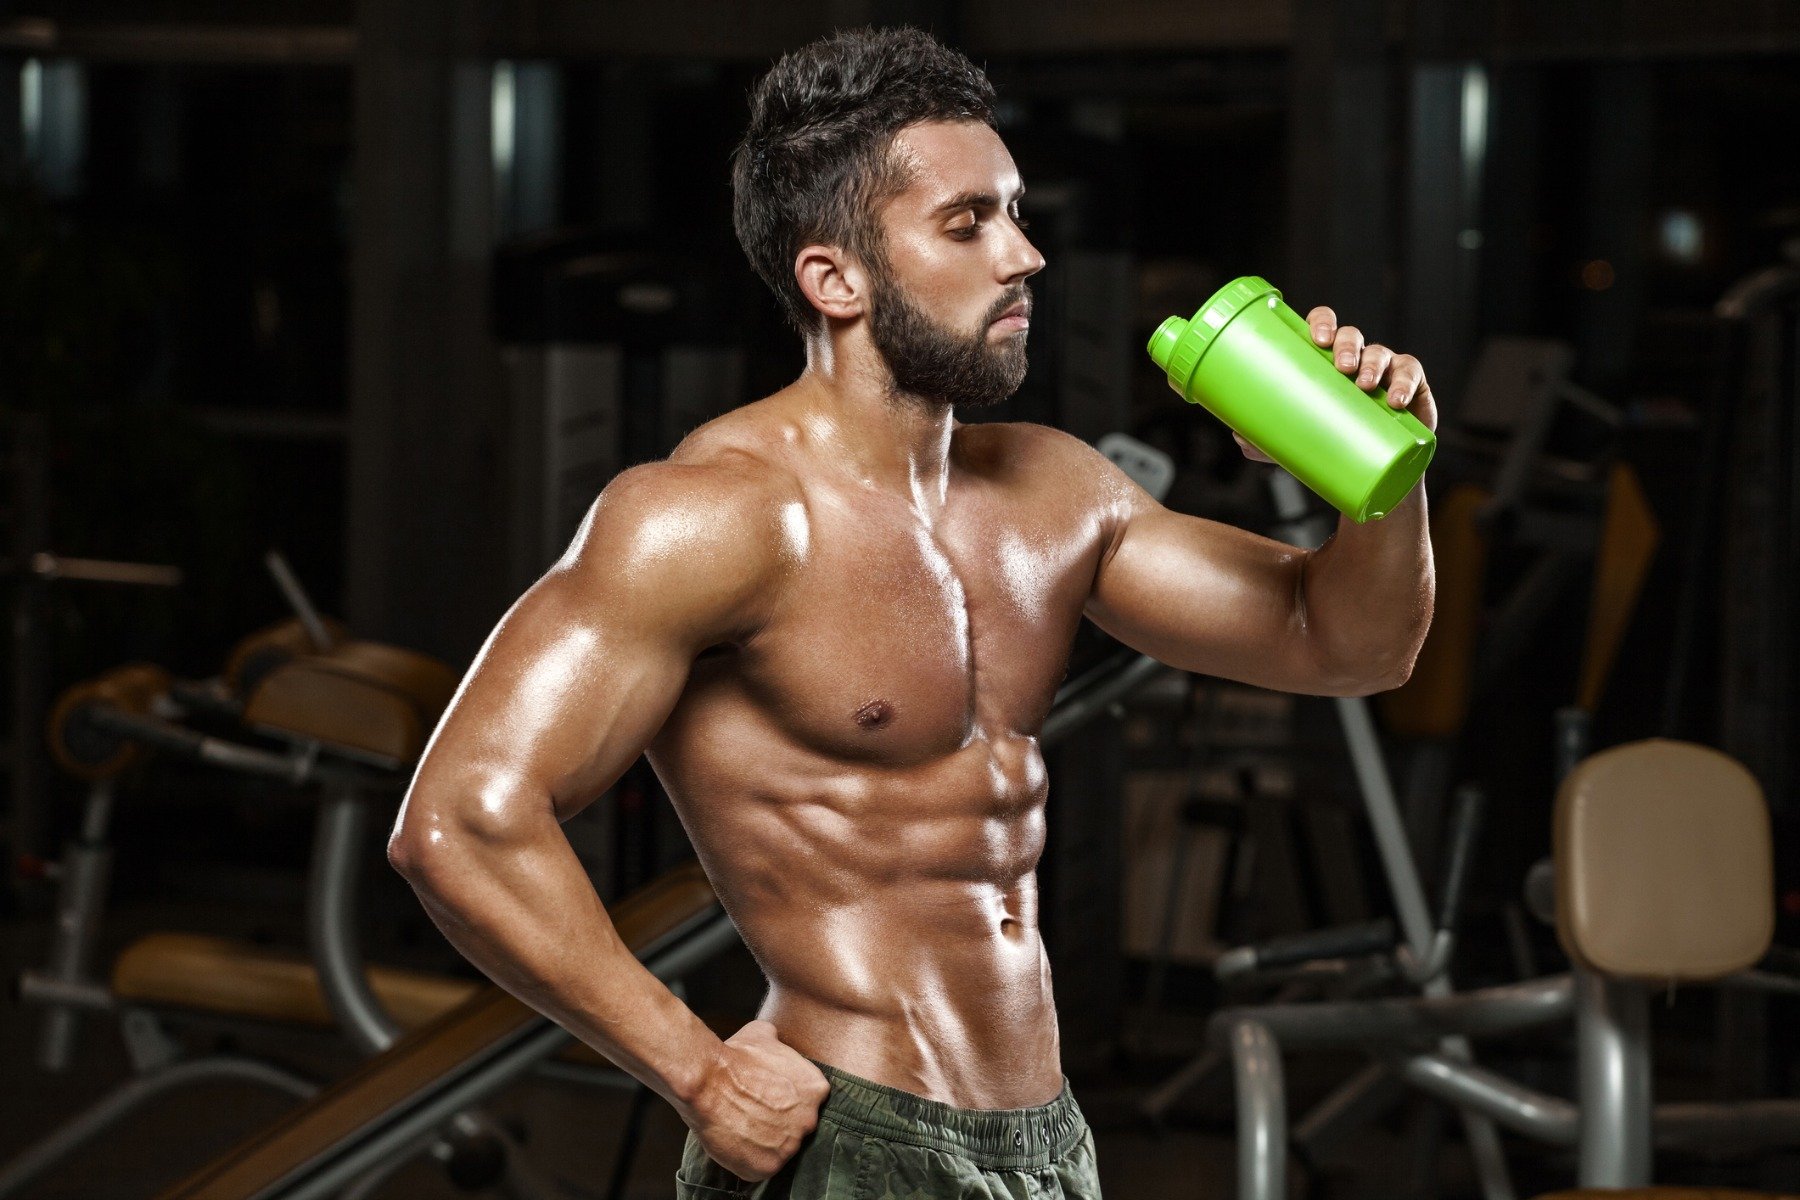 Casein and casein protein - everything you need to know